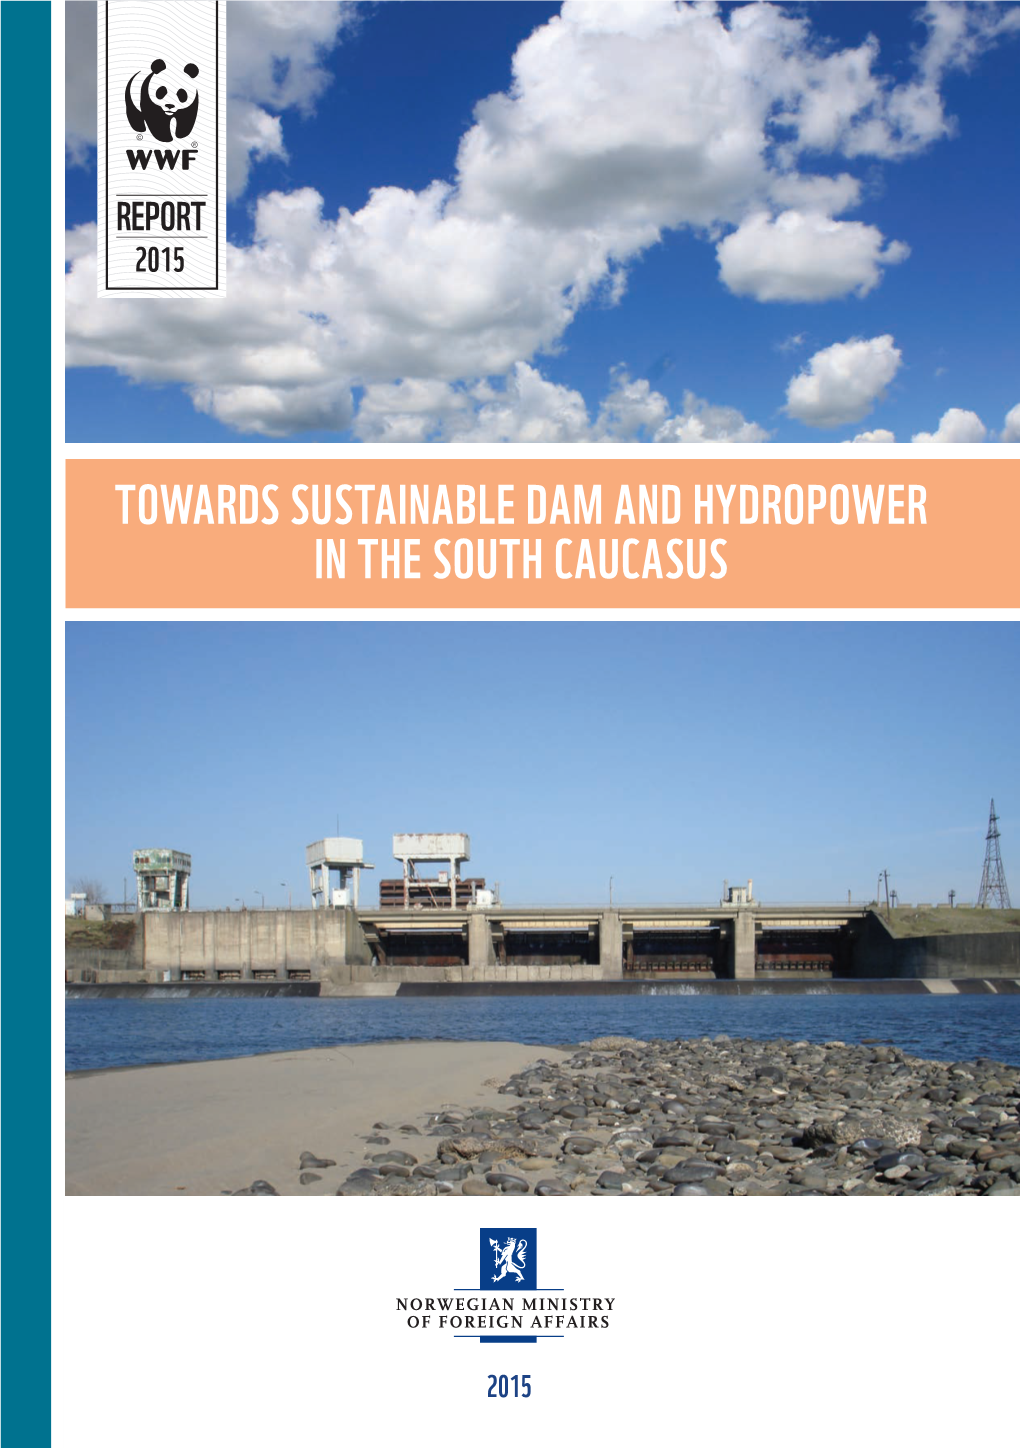 Towards Sustainable Dam and Hydropower in the South Caucasus